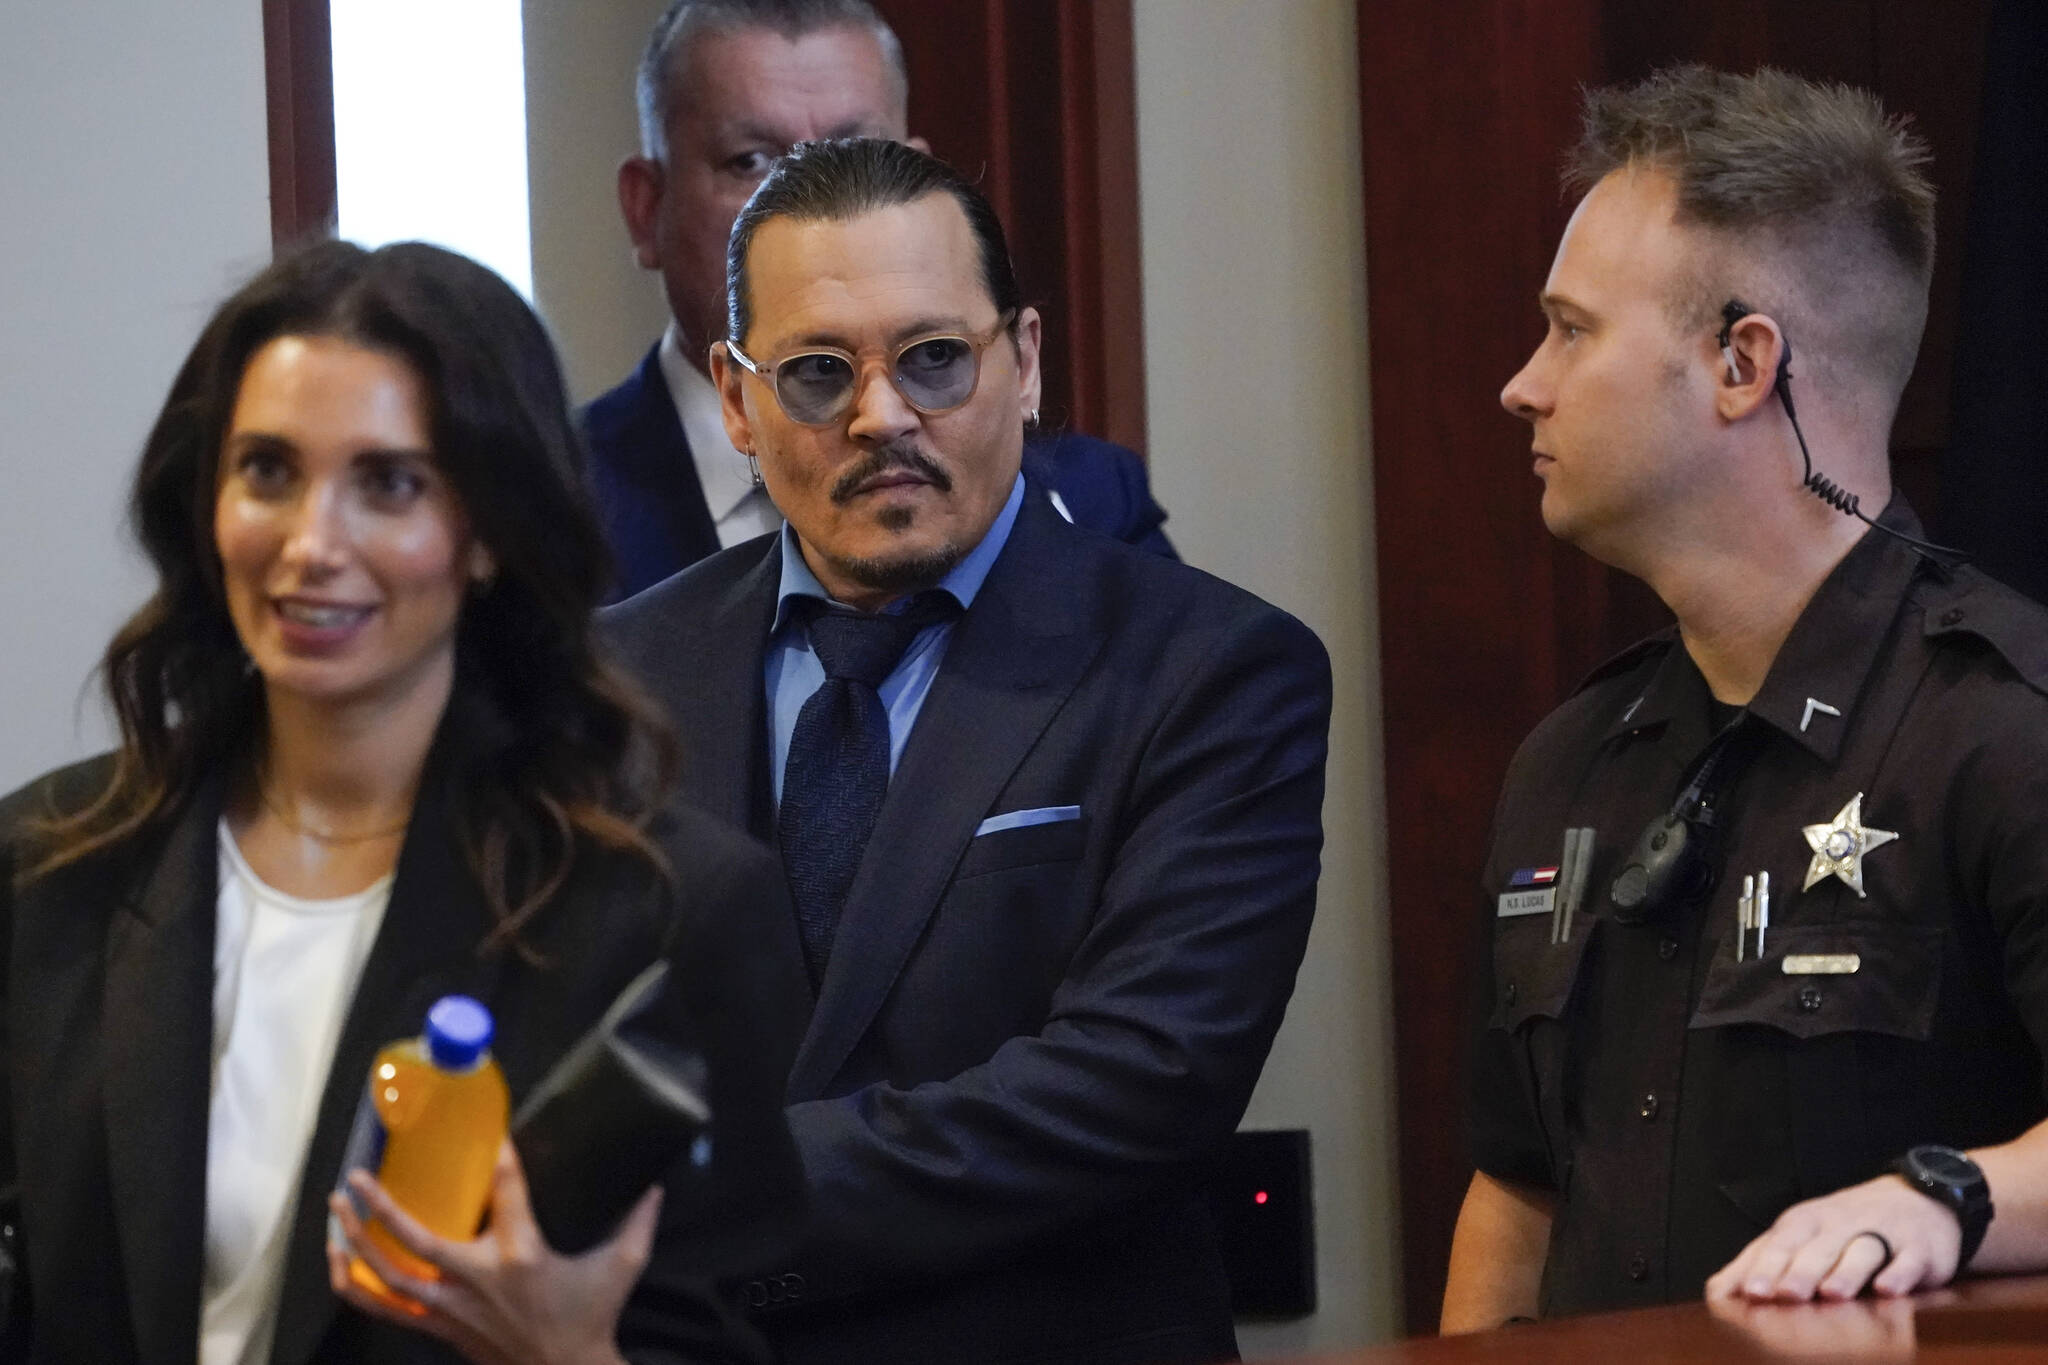 Actor Johnny Depp arrives in the courtroom for closing arguments at the Fairfax County Circuit Courthouse in Fairfax, Va., Friday, May 27, 2022. Depp sued his ex-wife Amber Heard for libel in Fairfax County Circuit Court after she wrote an op-ed piece in The Washington Post in 2018 referring to herself as a “public figure representing domestic abuse.” (AP Photo/Steve Helber, Pool)